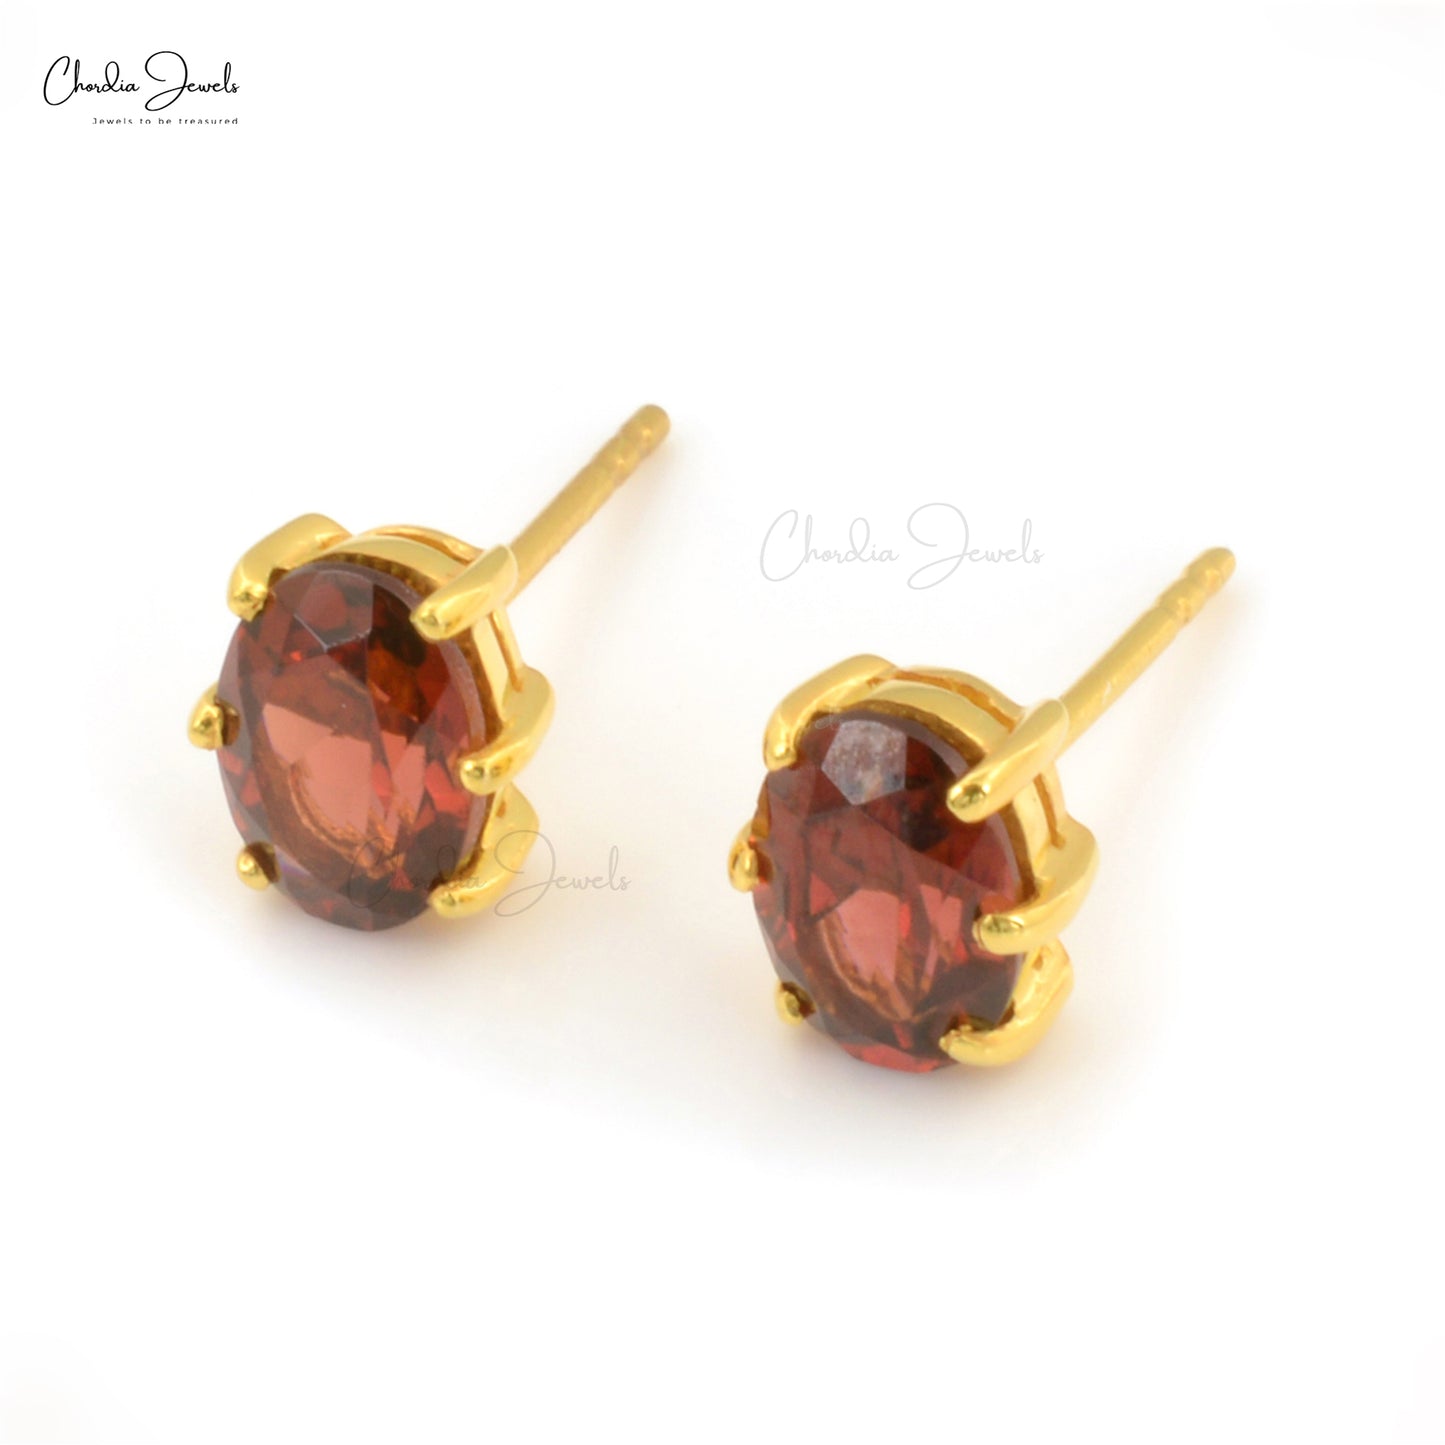 High Quality Jewelry In 925 Sterling Silver Real Garnet Gemstone Oval Shape Stud Earrings At Wholesale Price